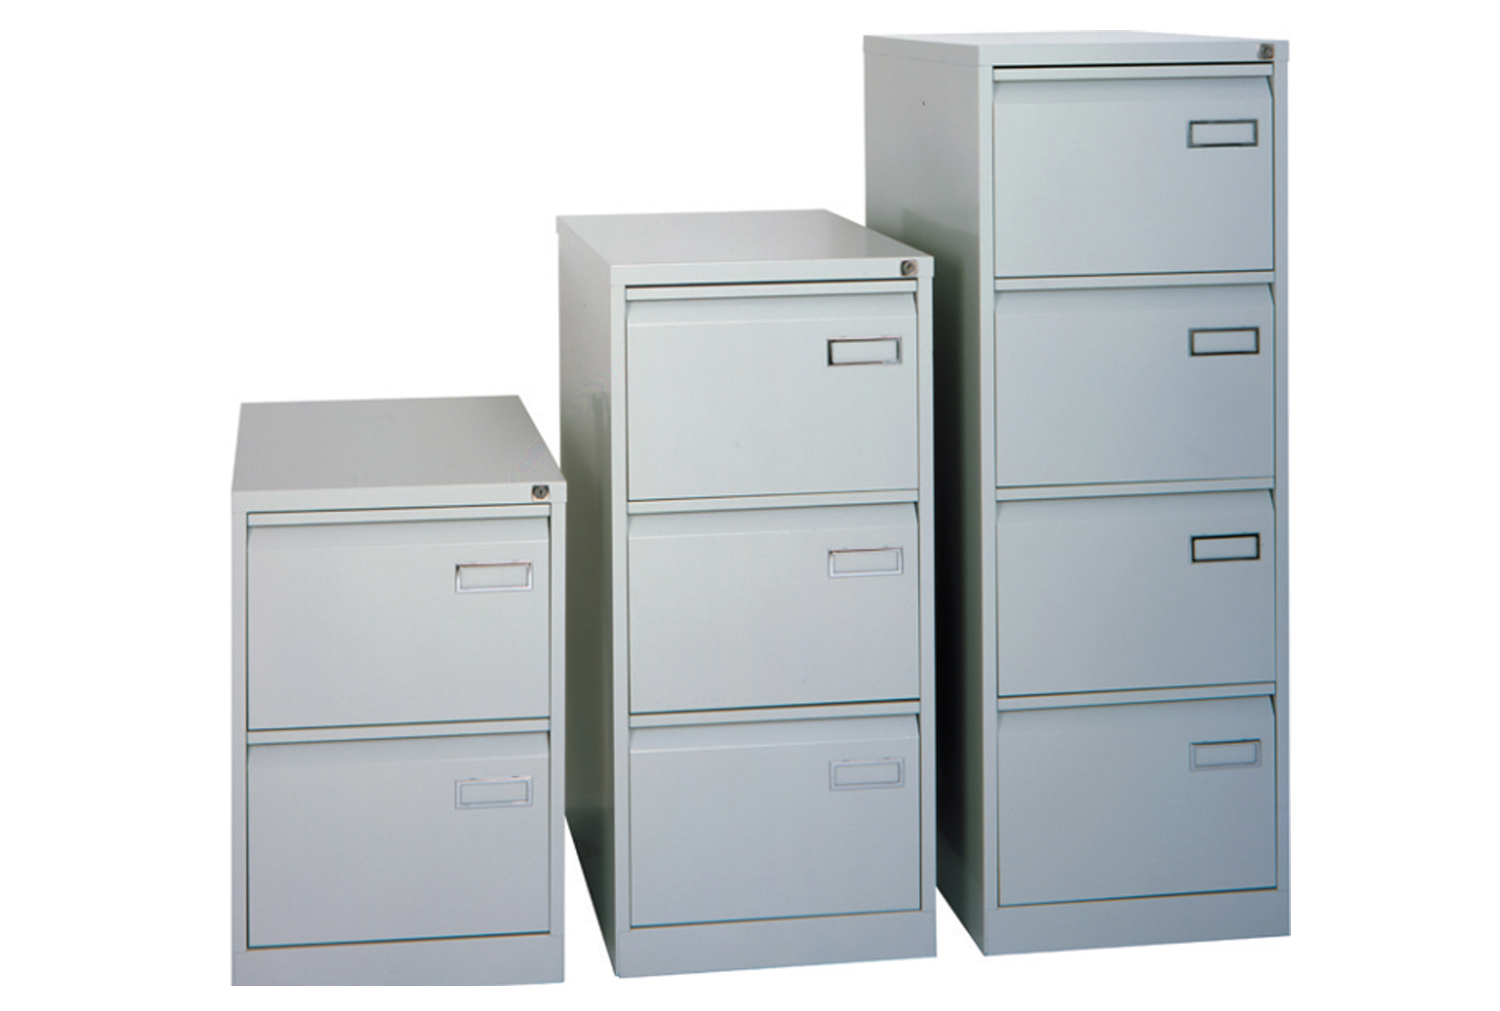 Bisley Executive PSF Filing Cabinet, 4 Drawer - 47wx62dx132h (cm), Grey, Fully Installed